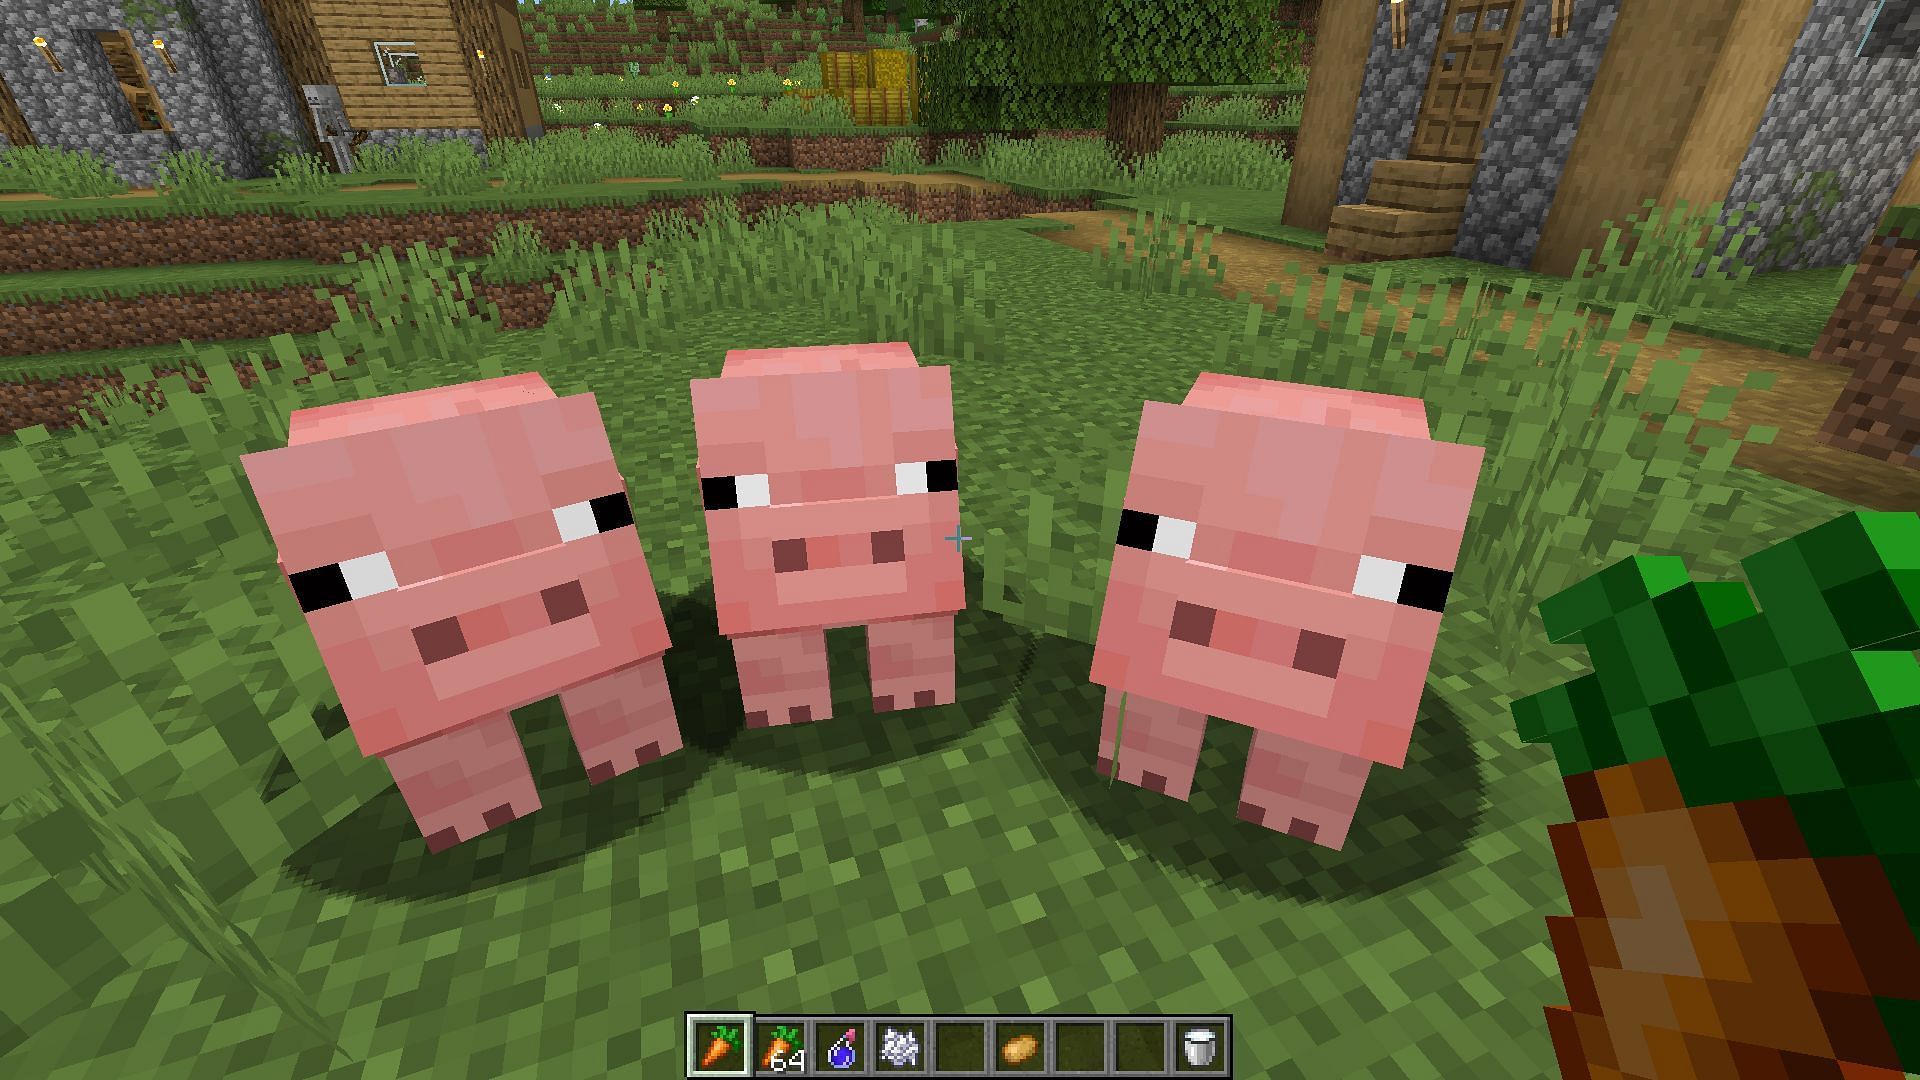 An example of pigs following a player holding a carrot (Image via Minecraft)